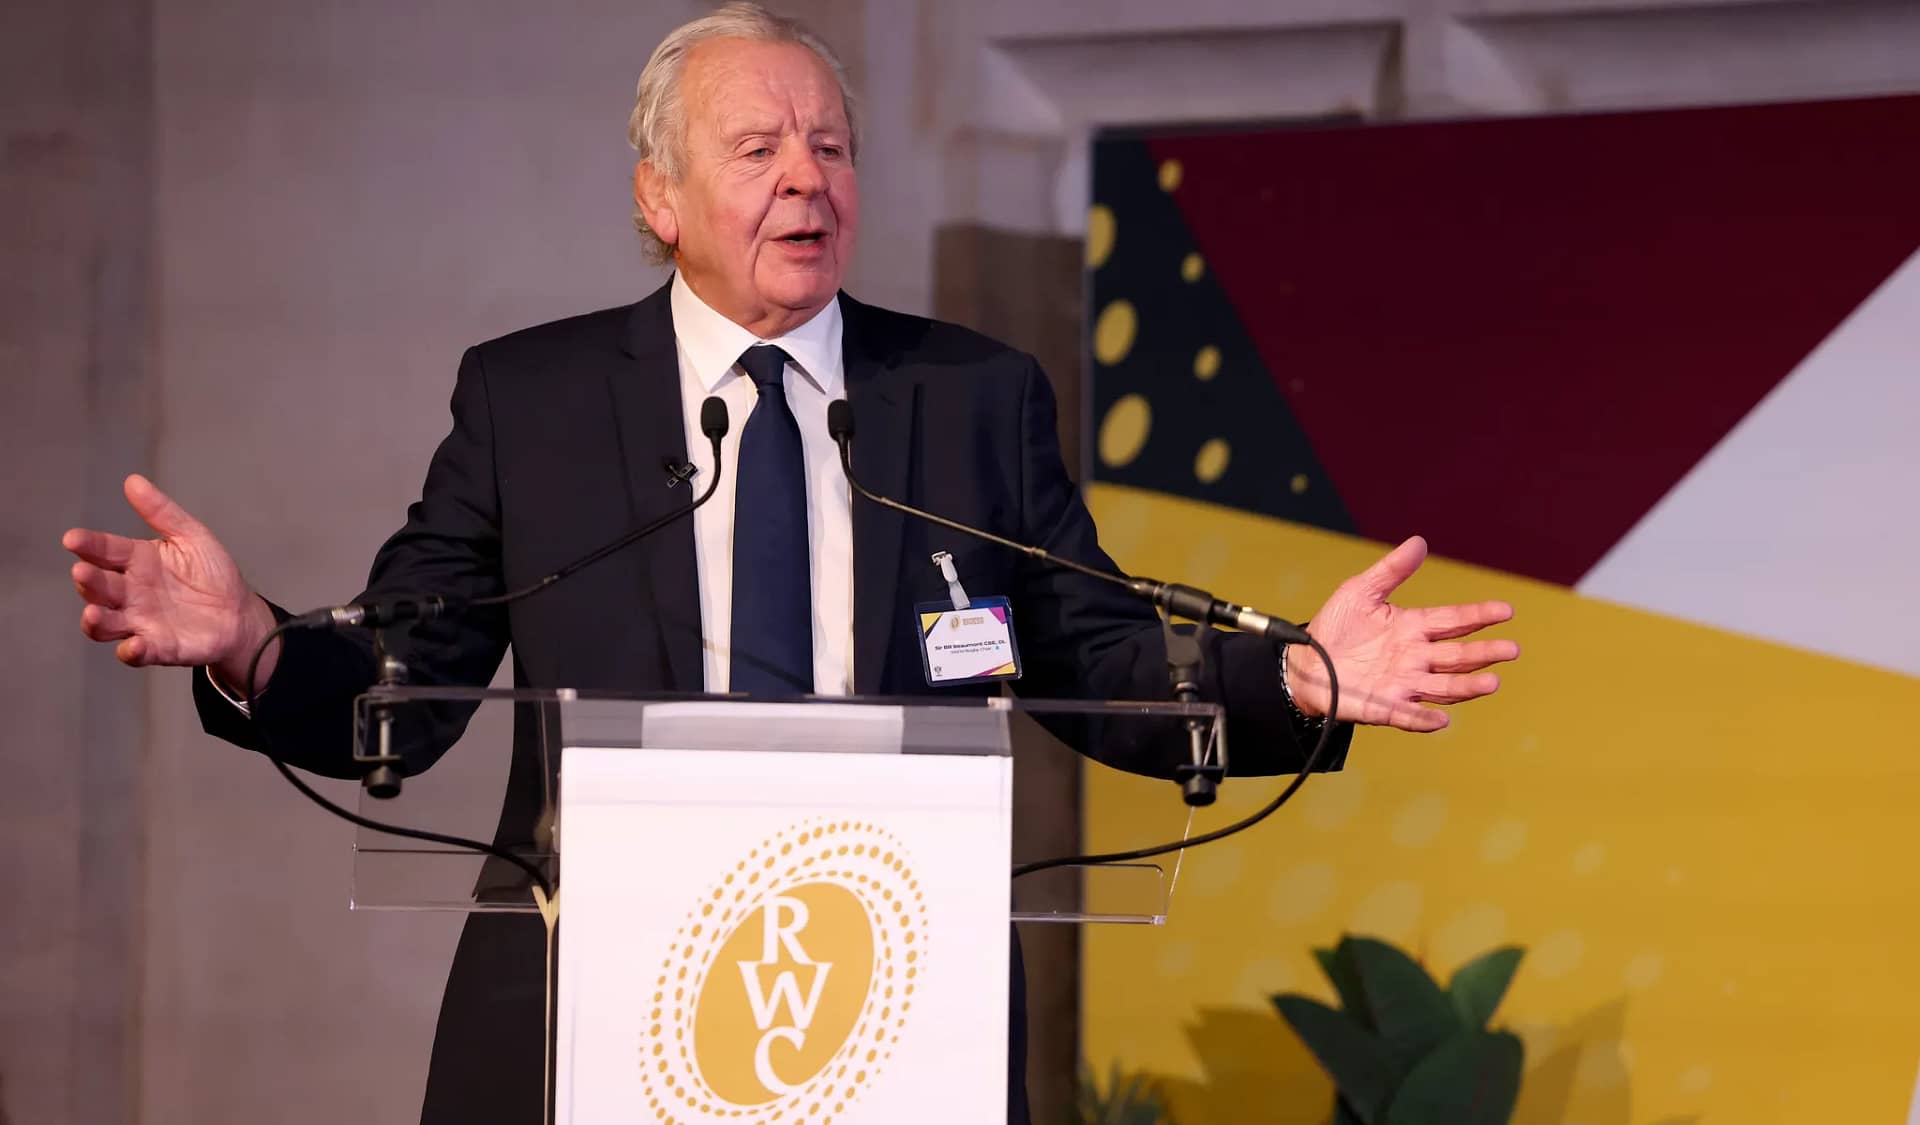 World Rugby Chairman Sir Bill Beaumont Receives Knighthood For Services